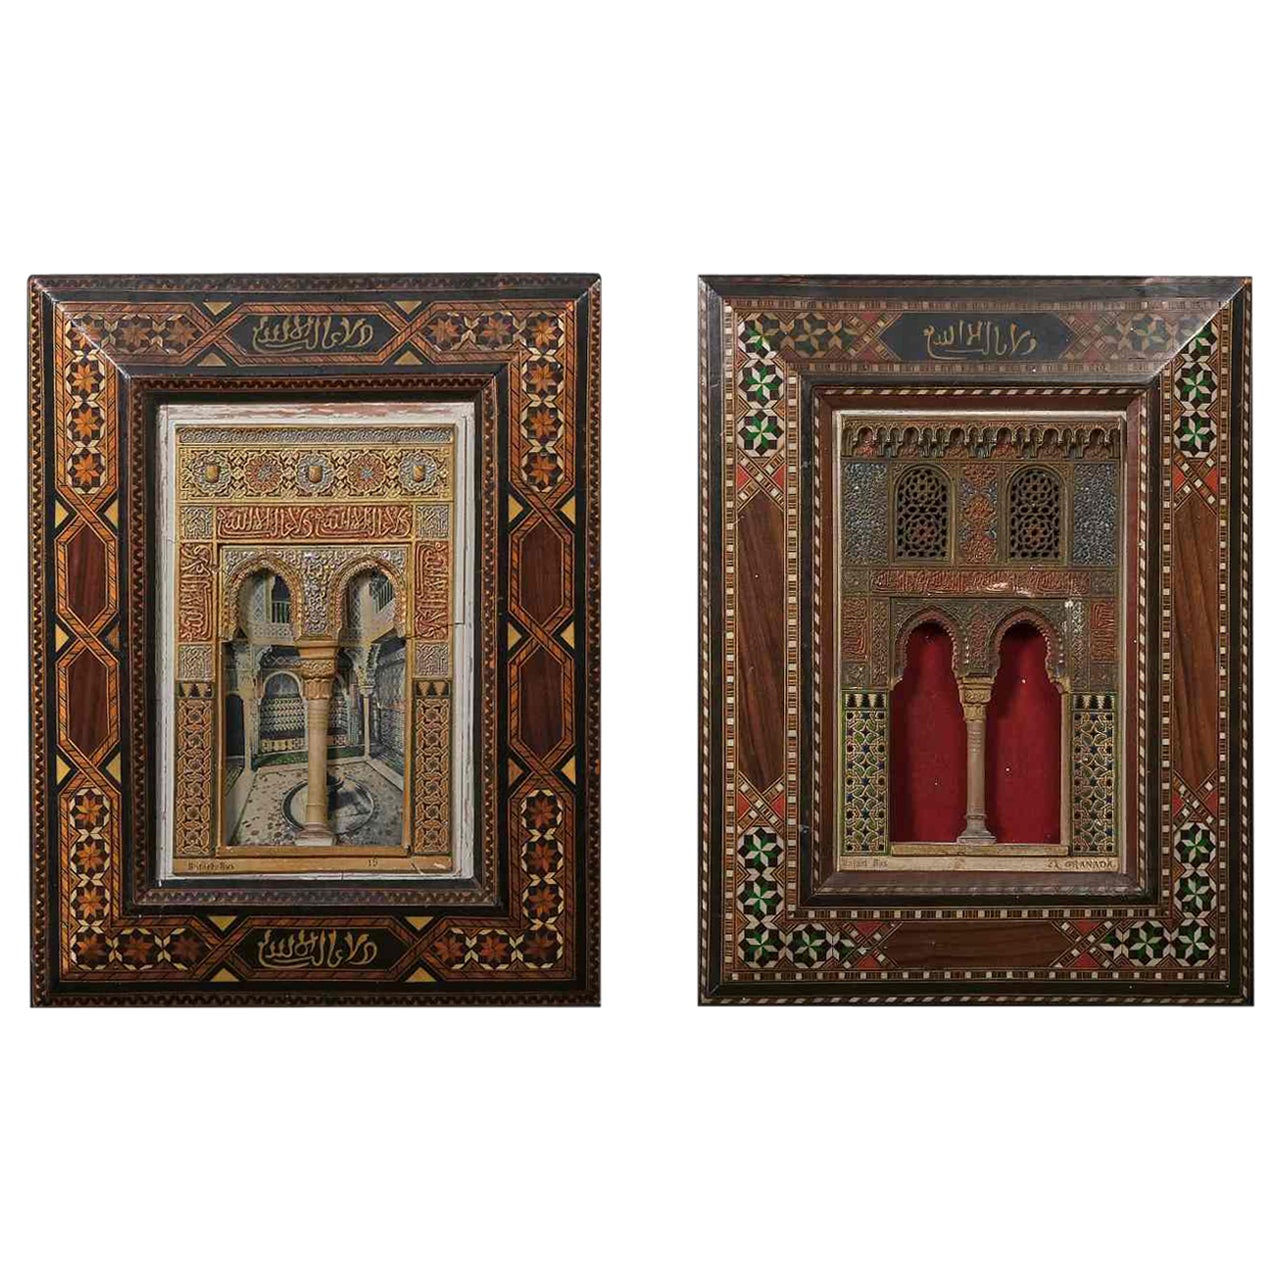 Pair of "Alhambra-Fakatmodels", Polychromed Stucco Plaque, by Rafael Rus